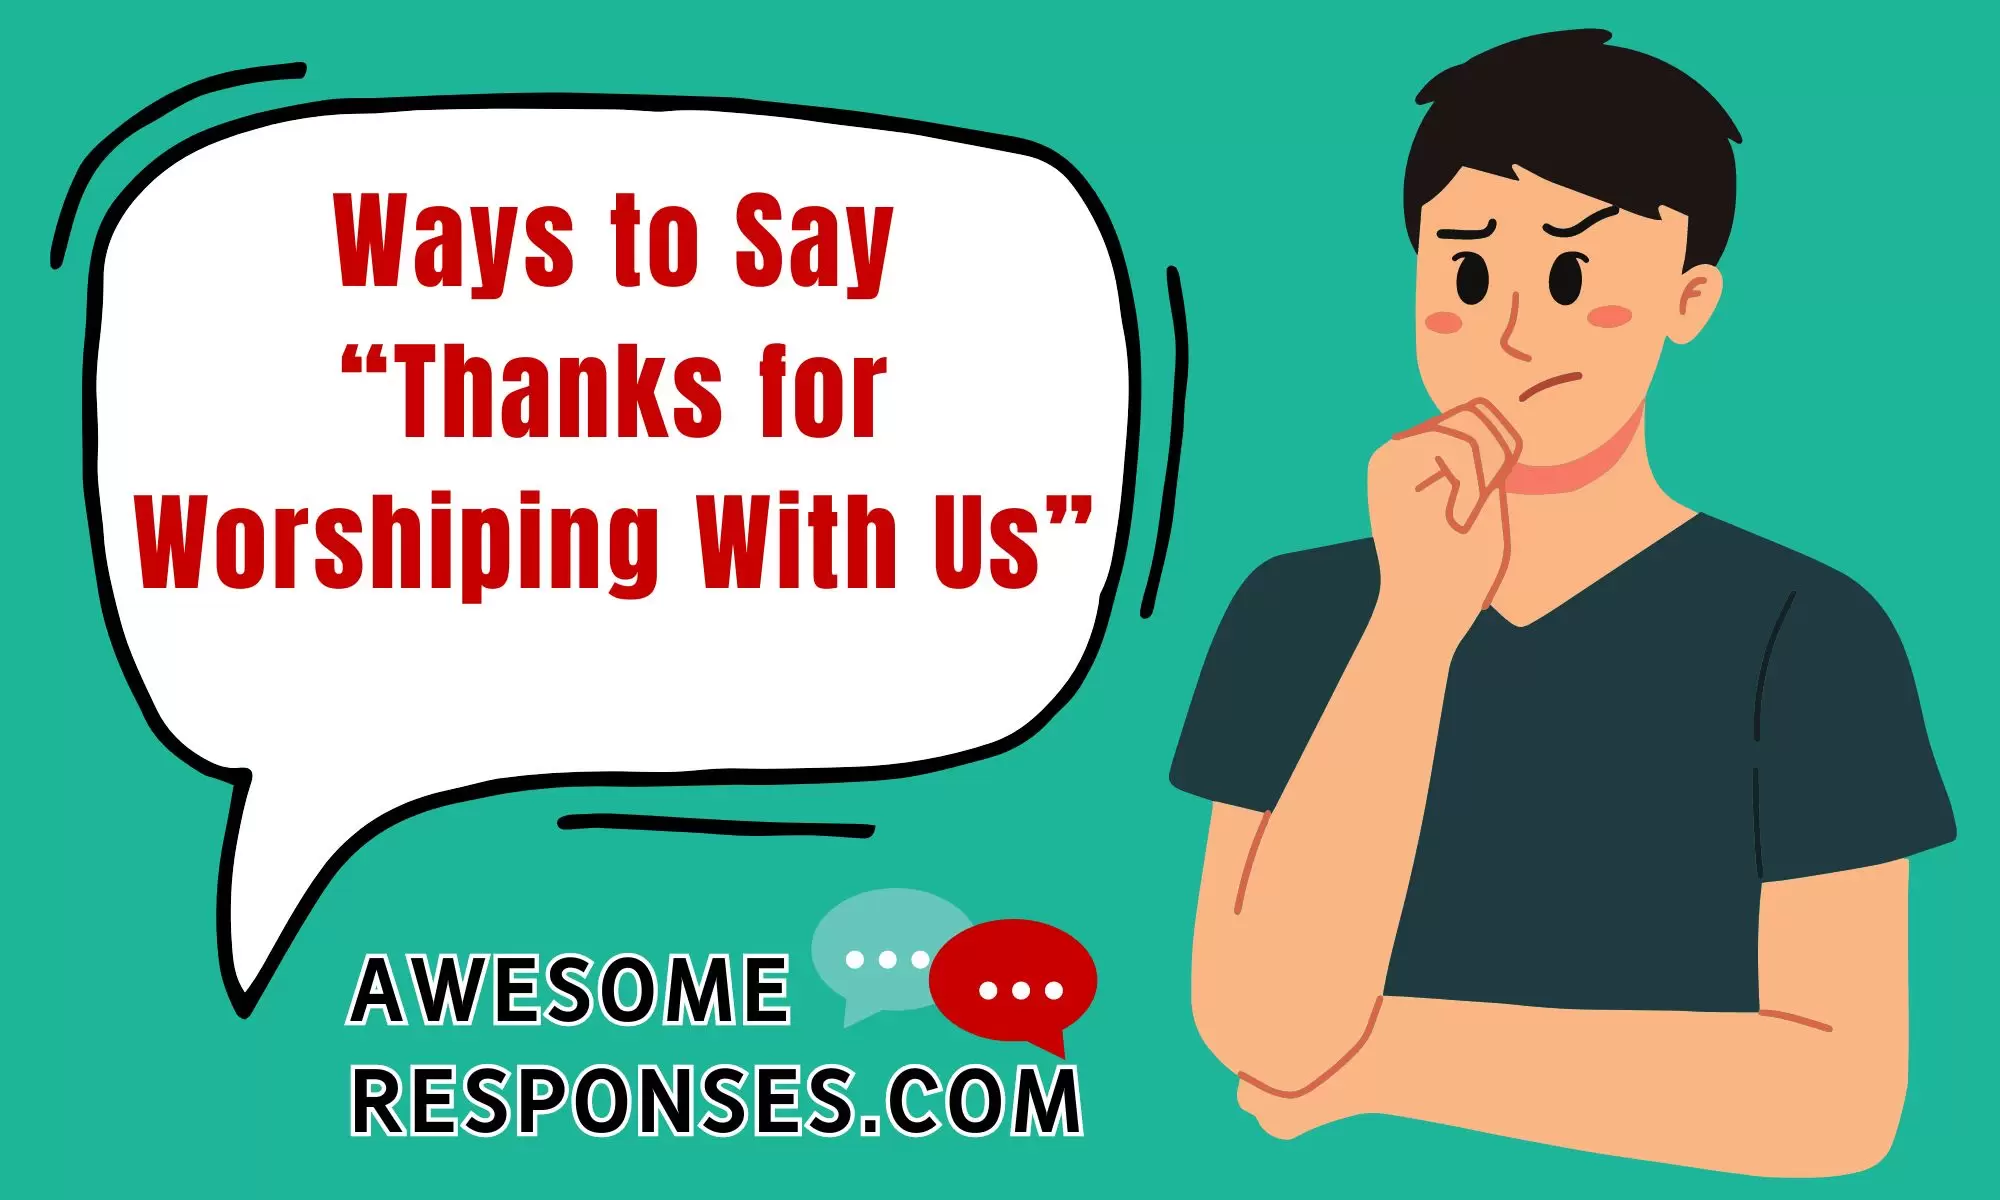 Ways to Say “Thanks for Worshiping With Us”